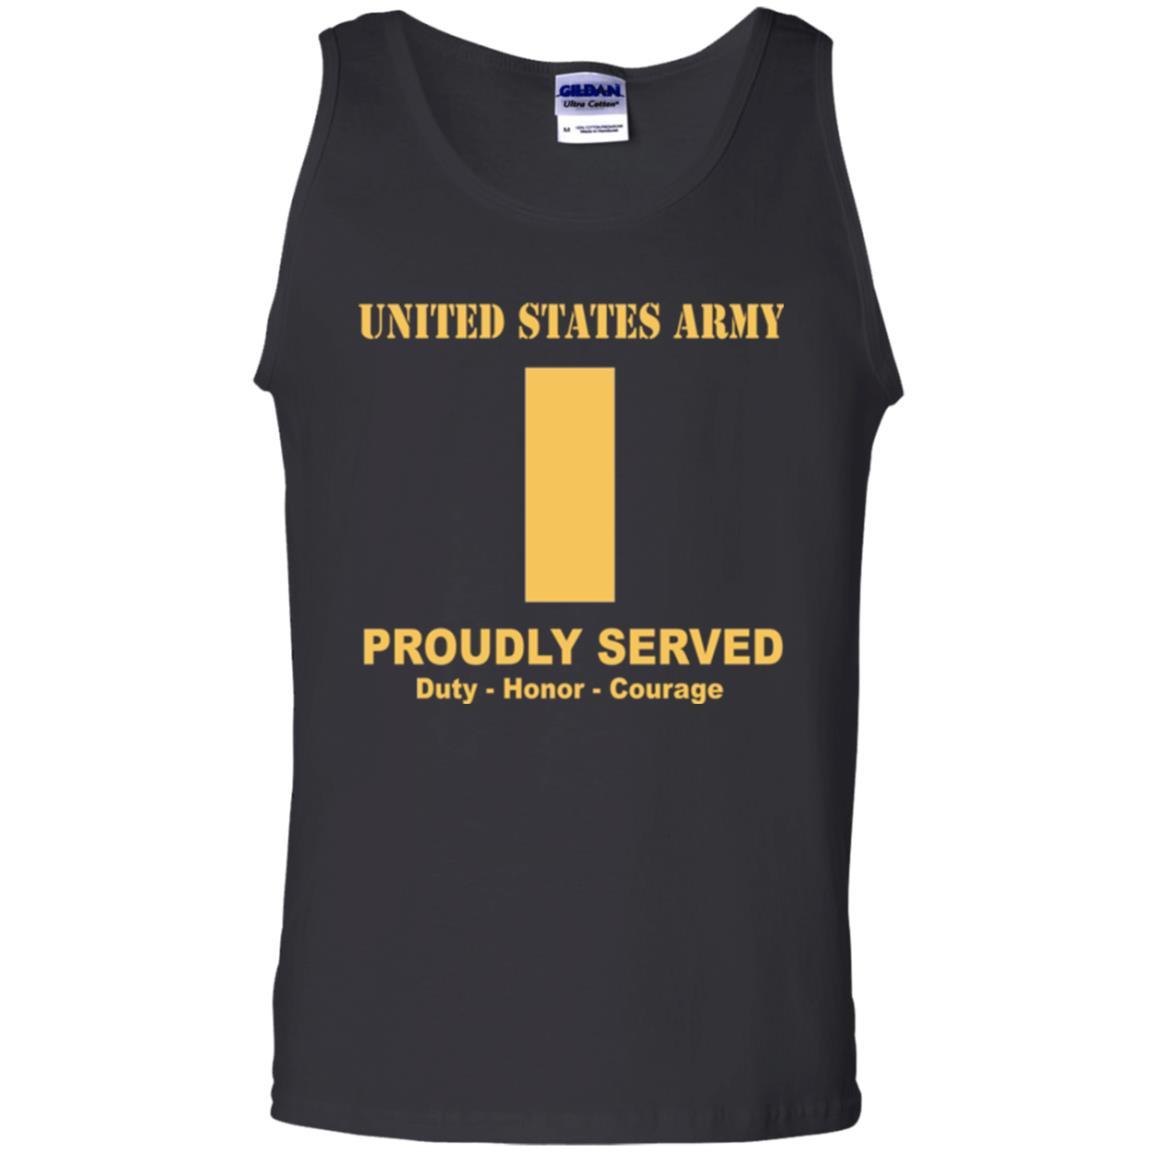 US Army O-1 Second Lieutenant O1 2LT Commissioned Officer Ranks Men Front Shirt US Army Rank-TShirt-Army-Veterans Nation